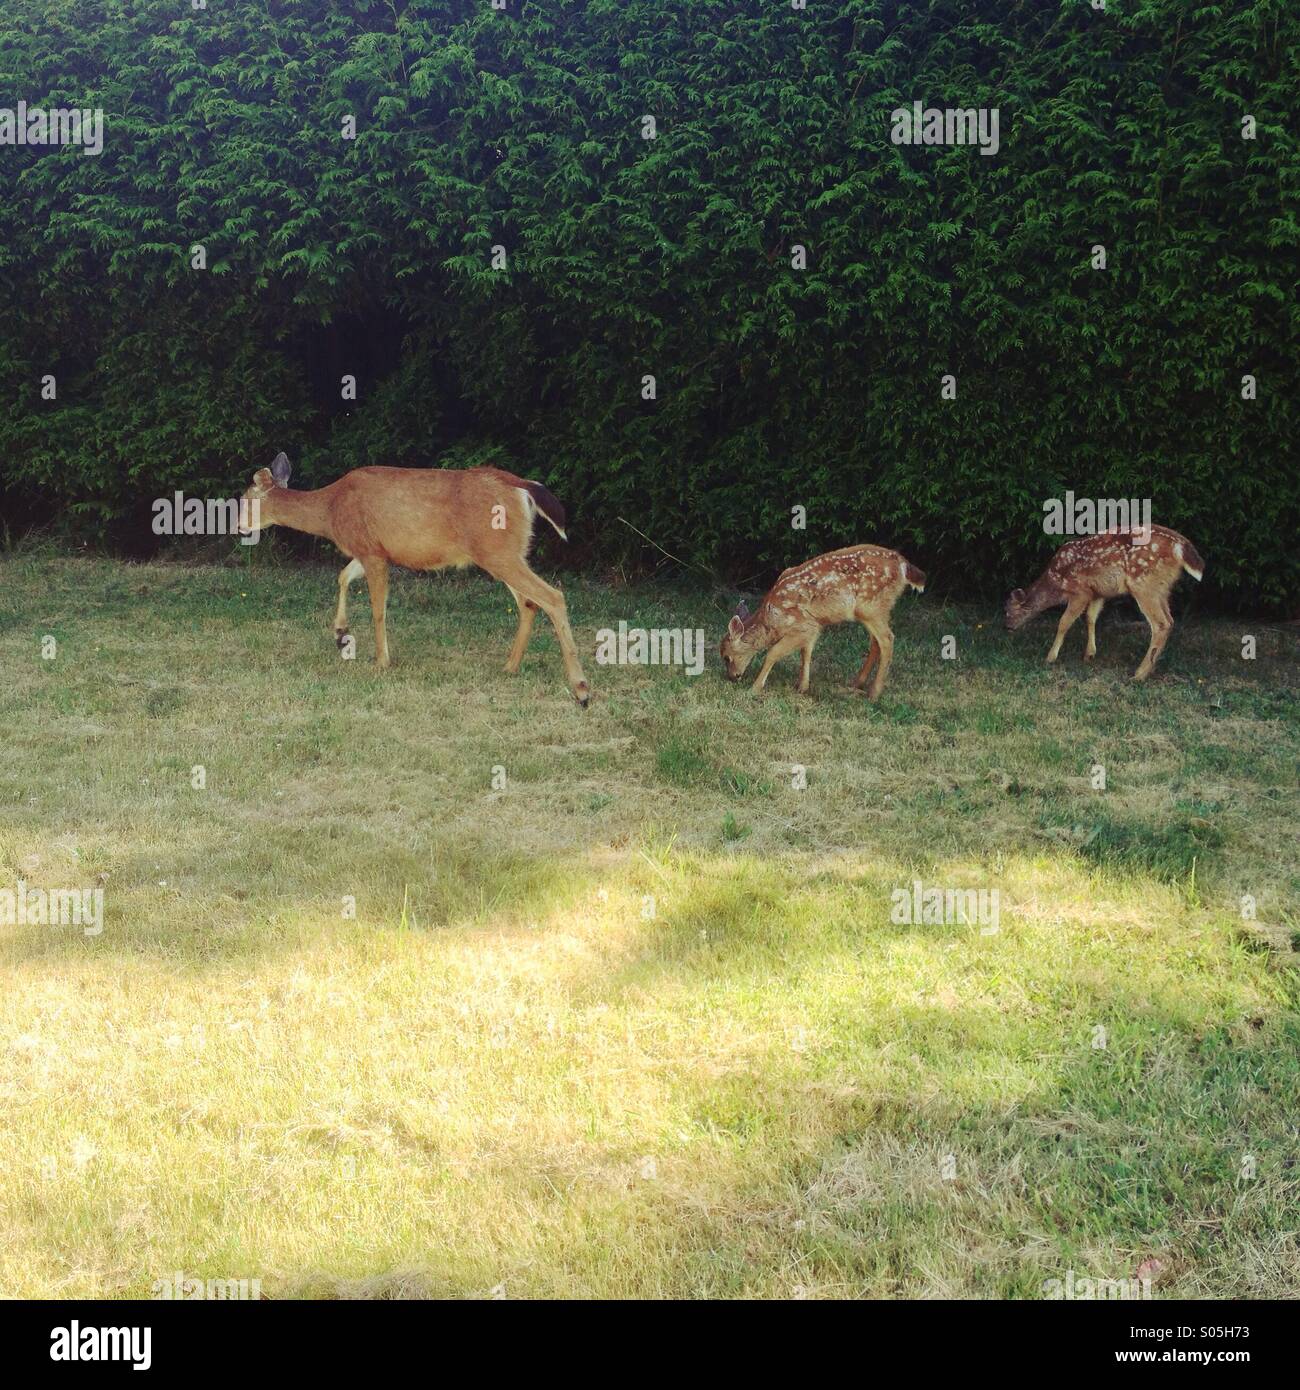 Whitetail doe deer walking along hedge with two cute fawns trailing behind in a row. Stock Photo